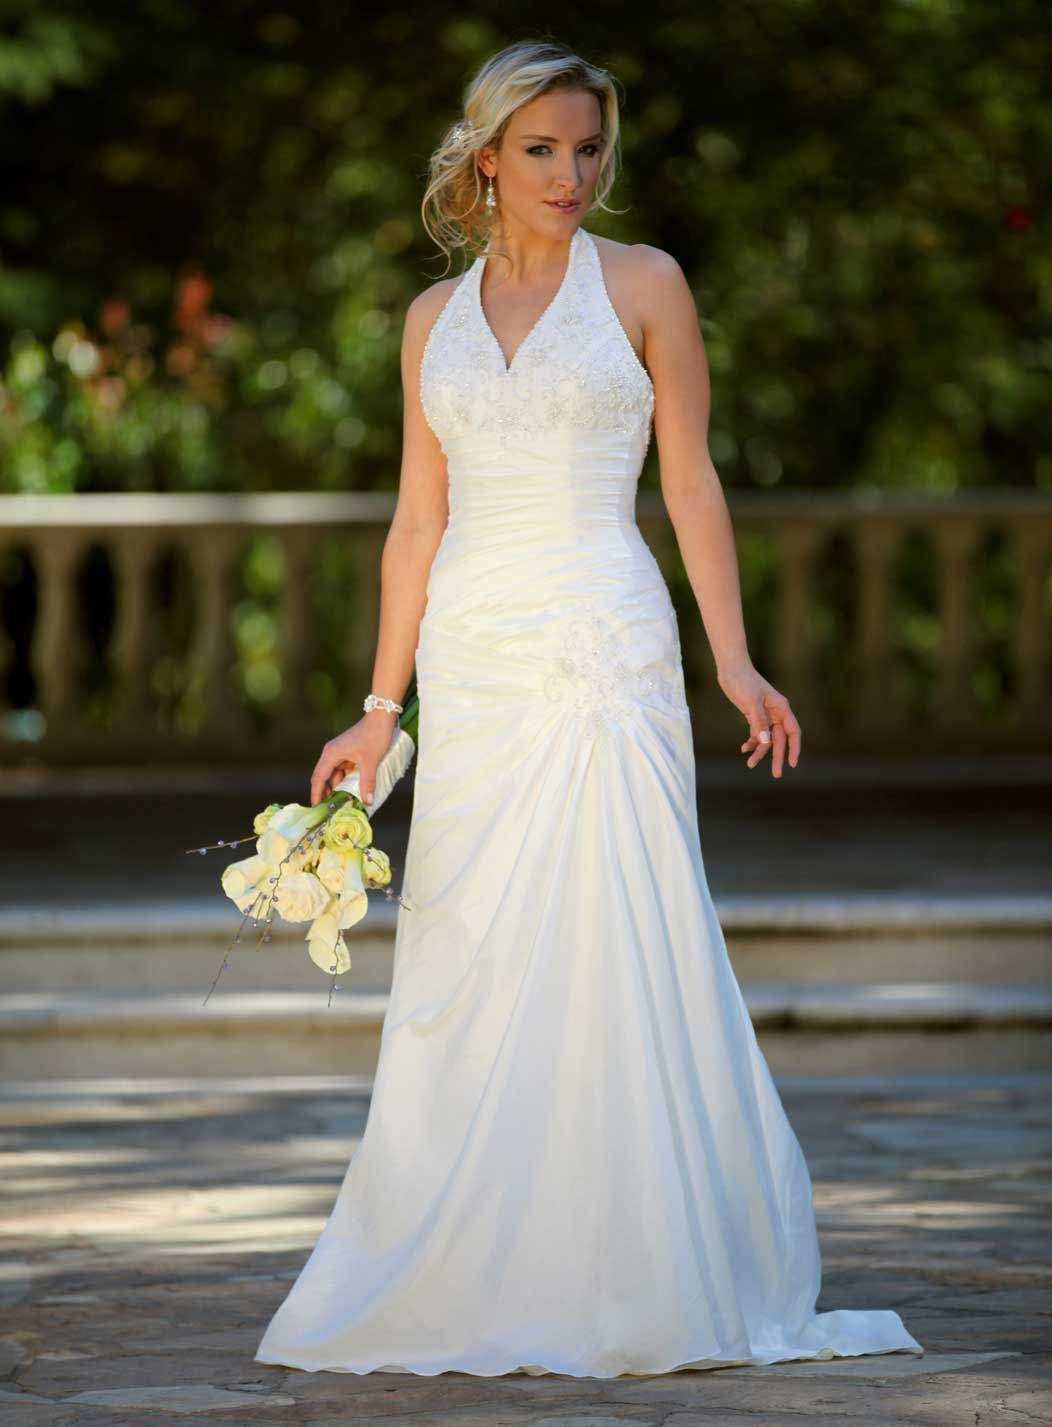 Vows Wedding Dress Store
 Wedding dress for 10 year vow renewal